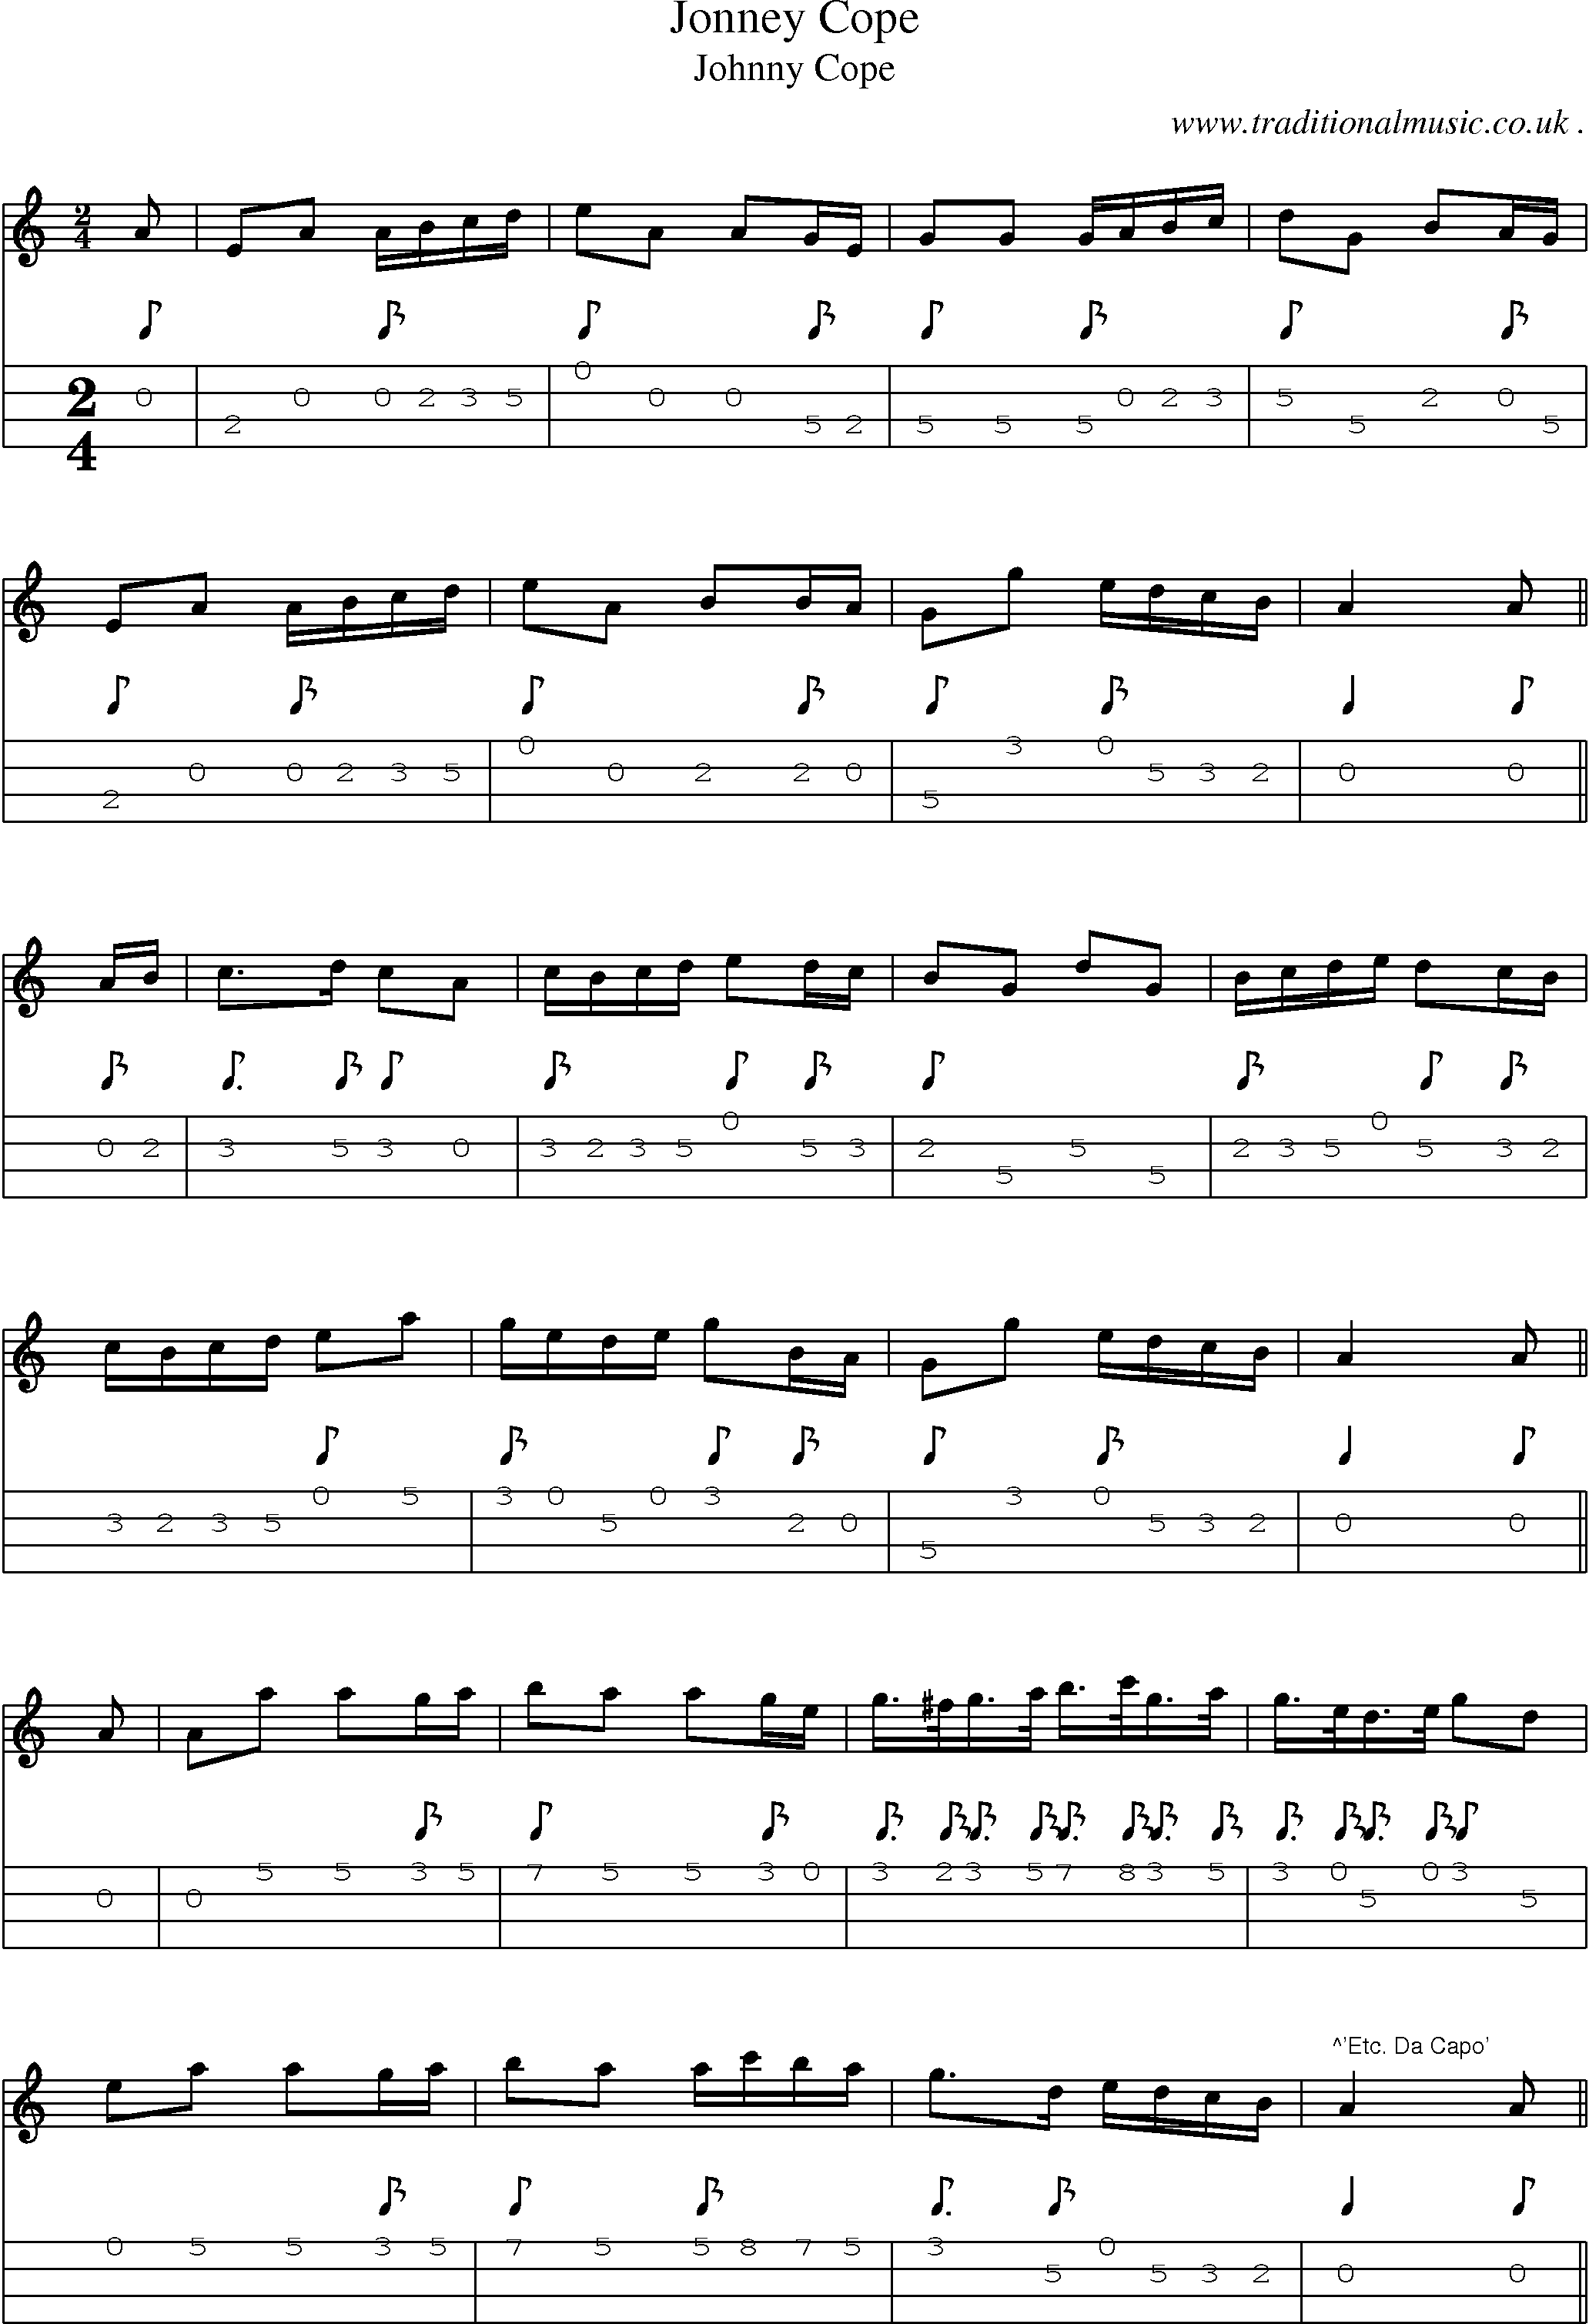 Sheet-Music and Mandolin Tabs for Jonney Cope